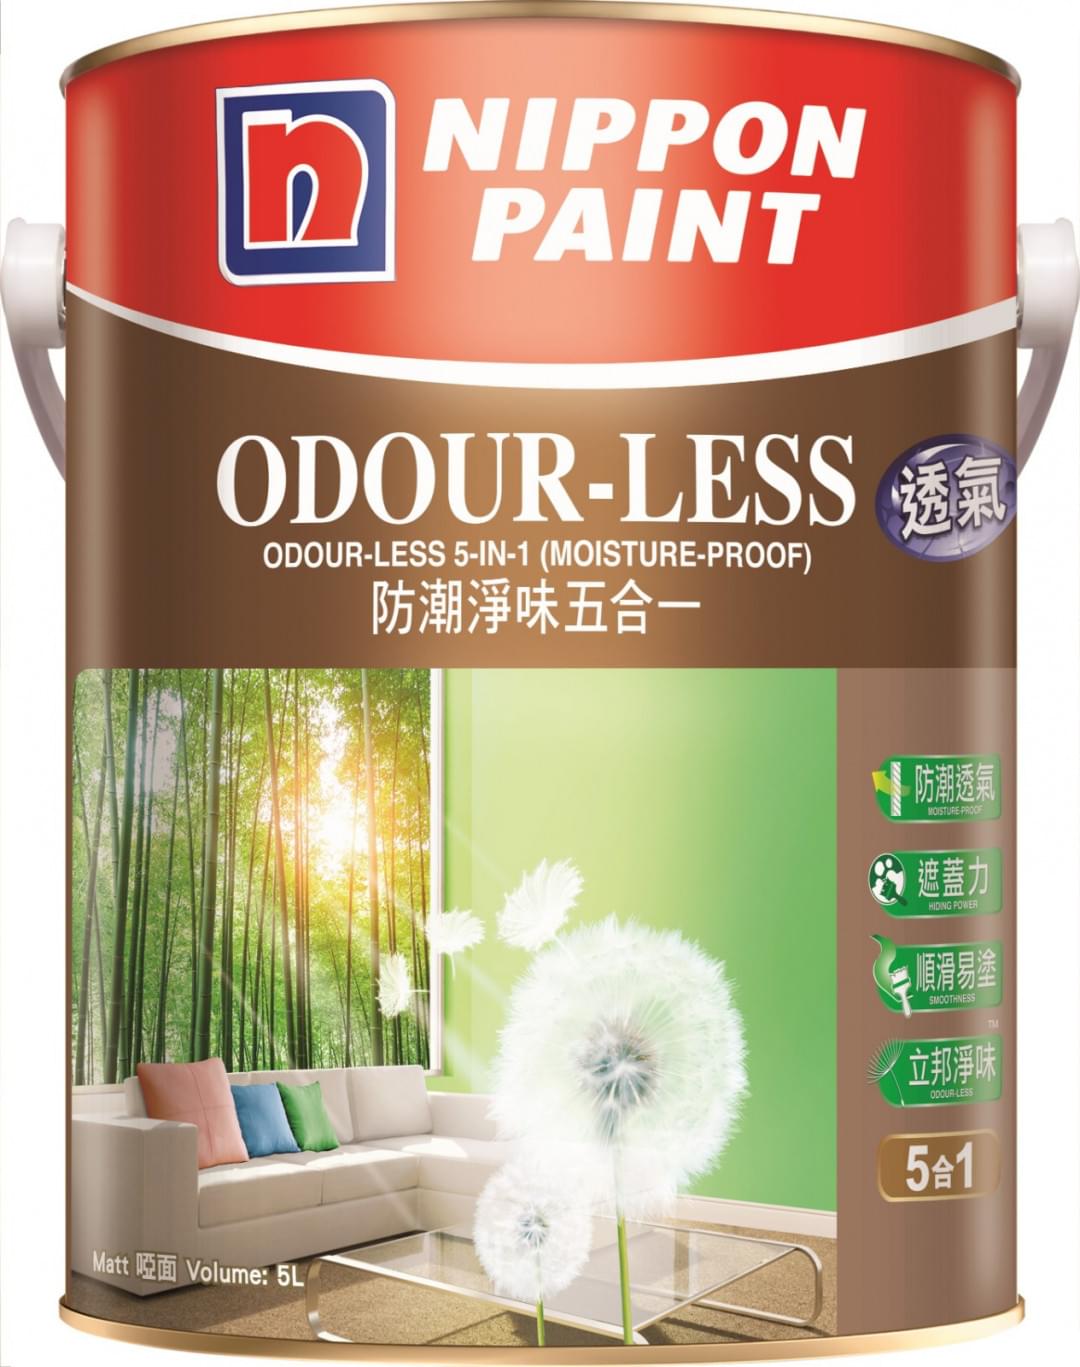 Nippon Paint Odour-less 5-in-1 (Moisture-Proof) Interior Emulsion Paint from Nippon Paint